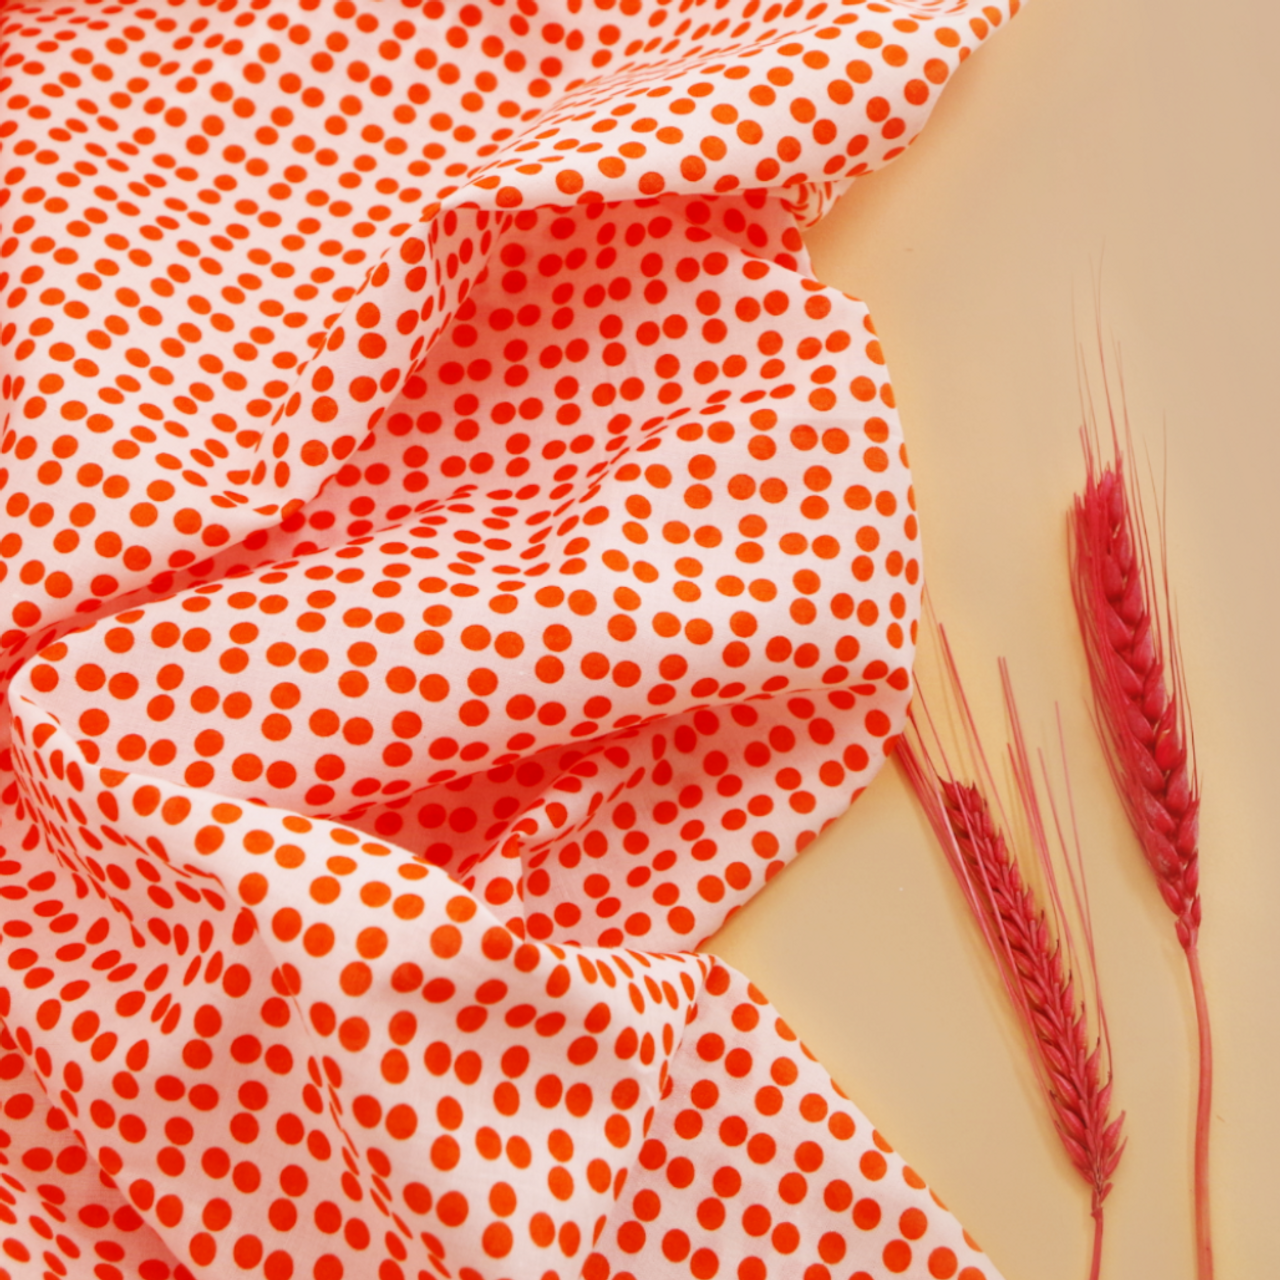 Flower printed red cotton poplin. Designer deadstock fabric cut to length.  Sold by units of 10 cm (1 mt= 10 units)